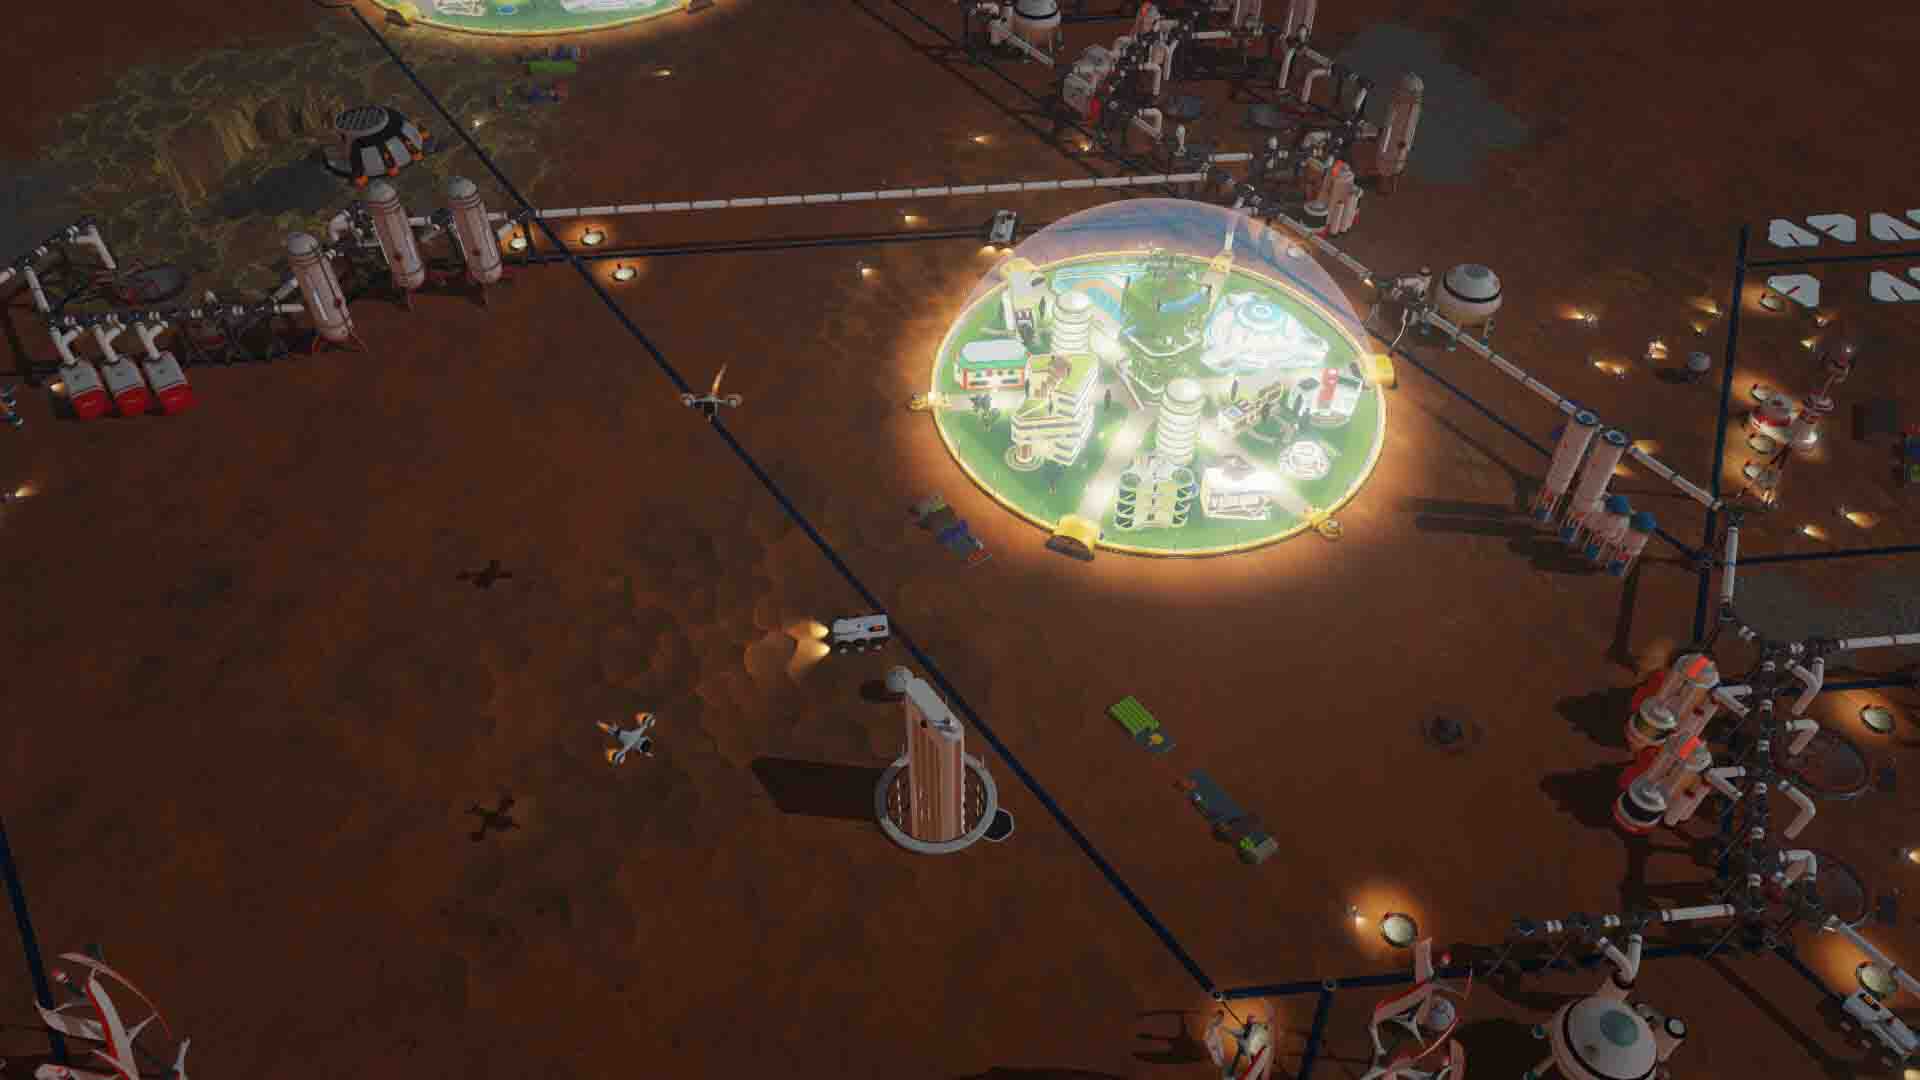 Surviving Mars System Requirements